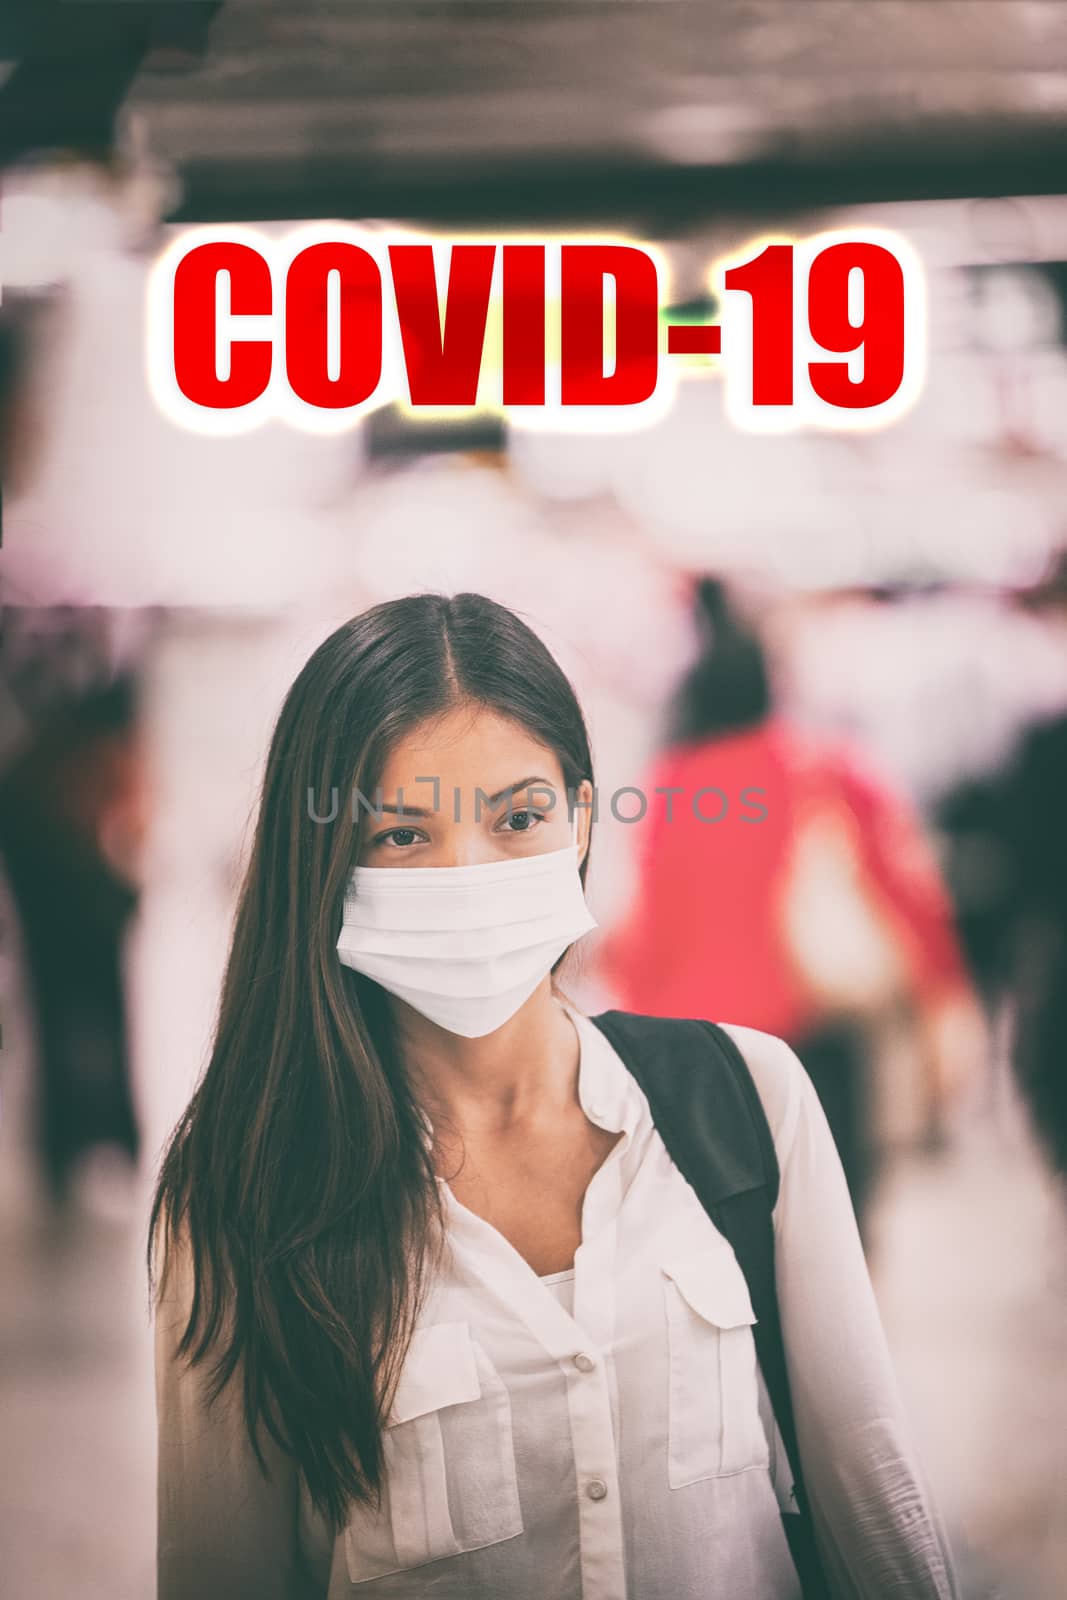 Coronavirus COVID-19 virus infection. Asian woman walking in airport crowd wearing virus surgical face mask with text title above. Vertical.